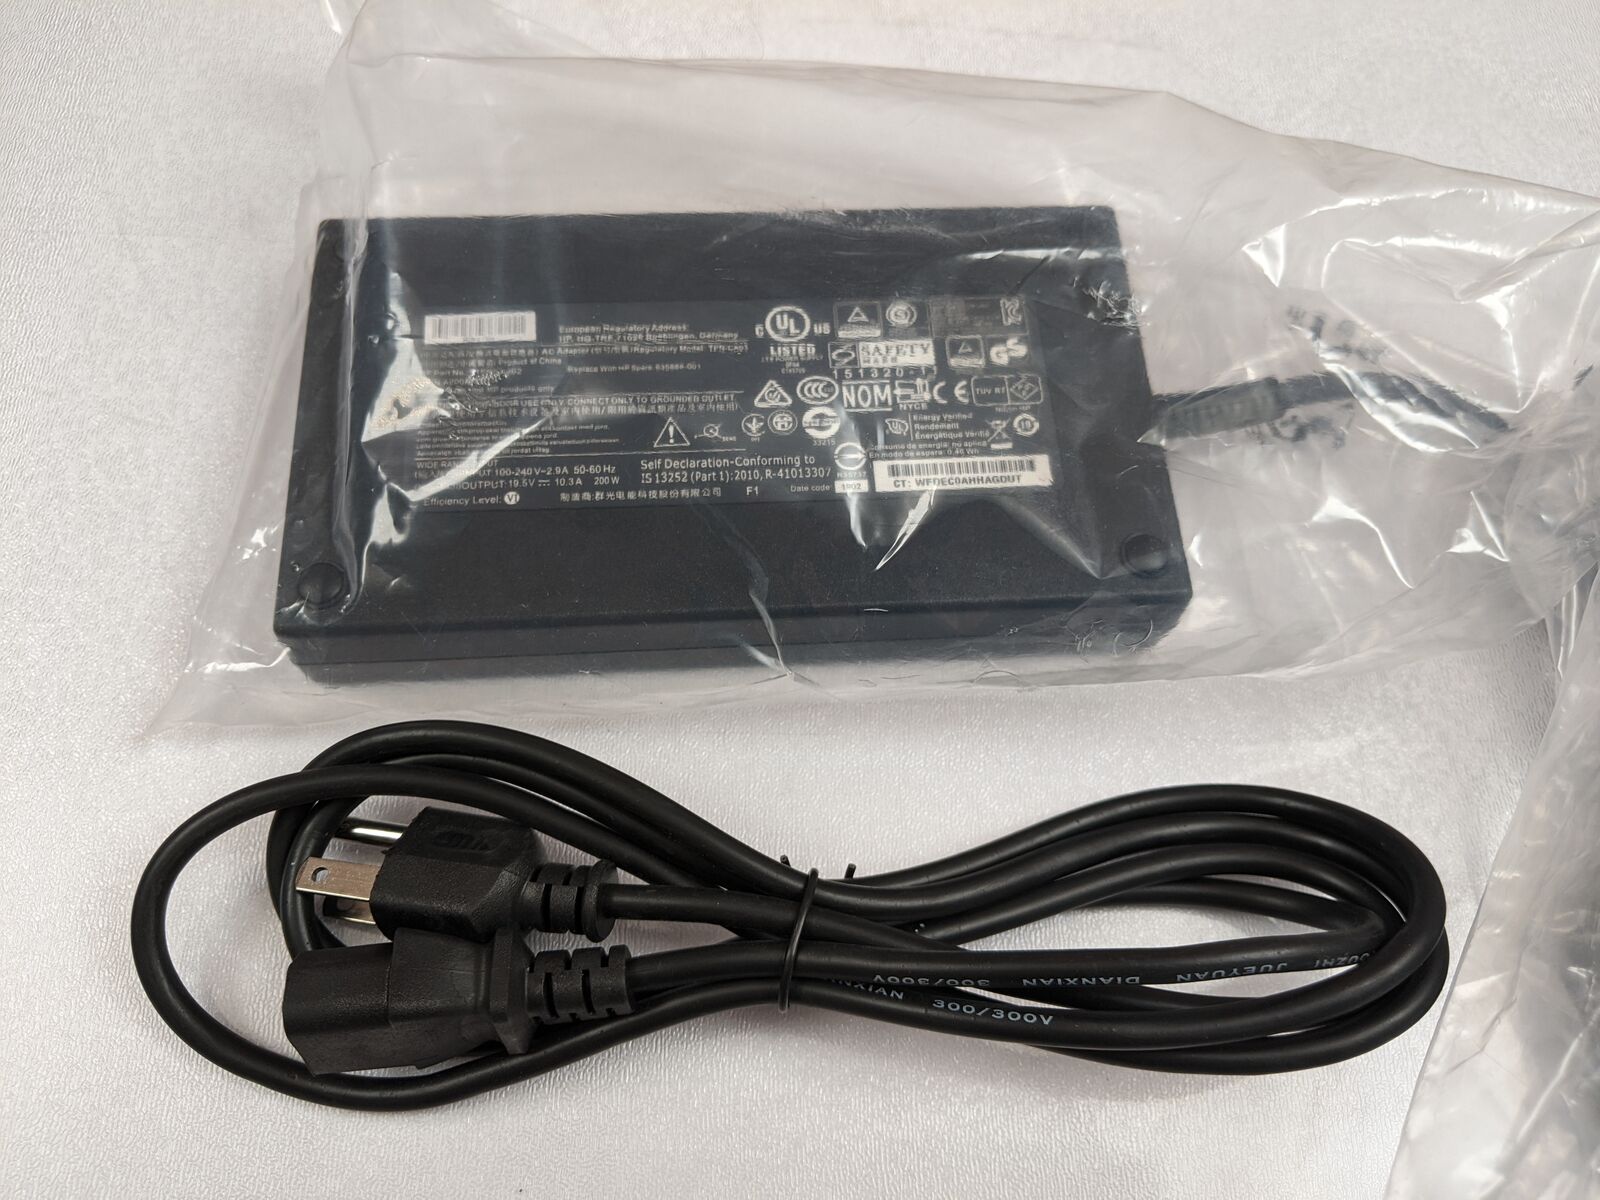 TPN-CA03 HP, 835888-001 HP, 859740-001 Original HP 835888-001 200W Charger/Adapter Product Info: In